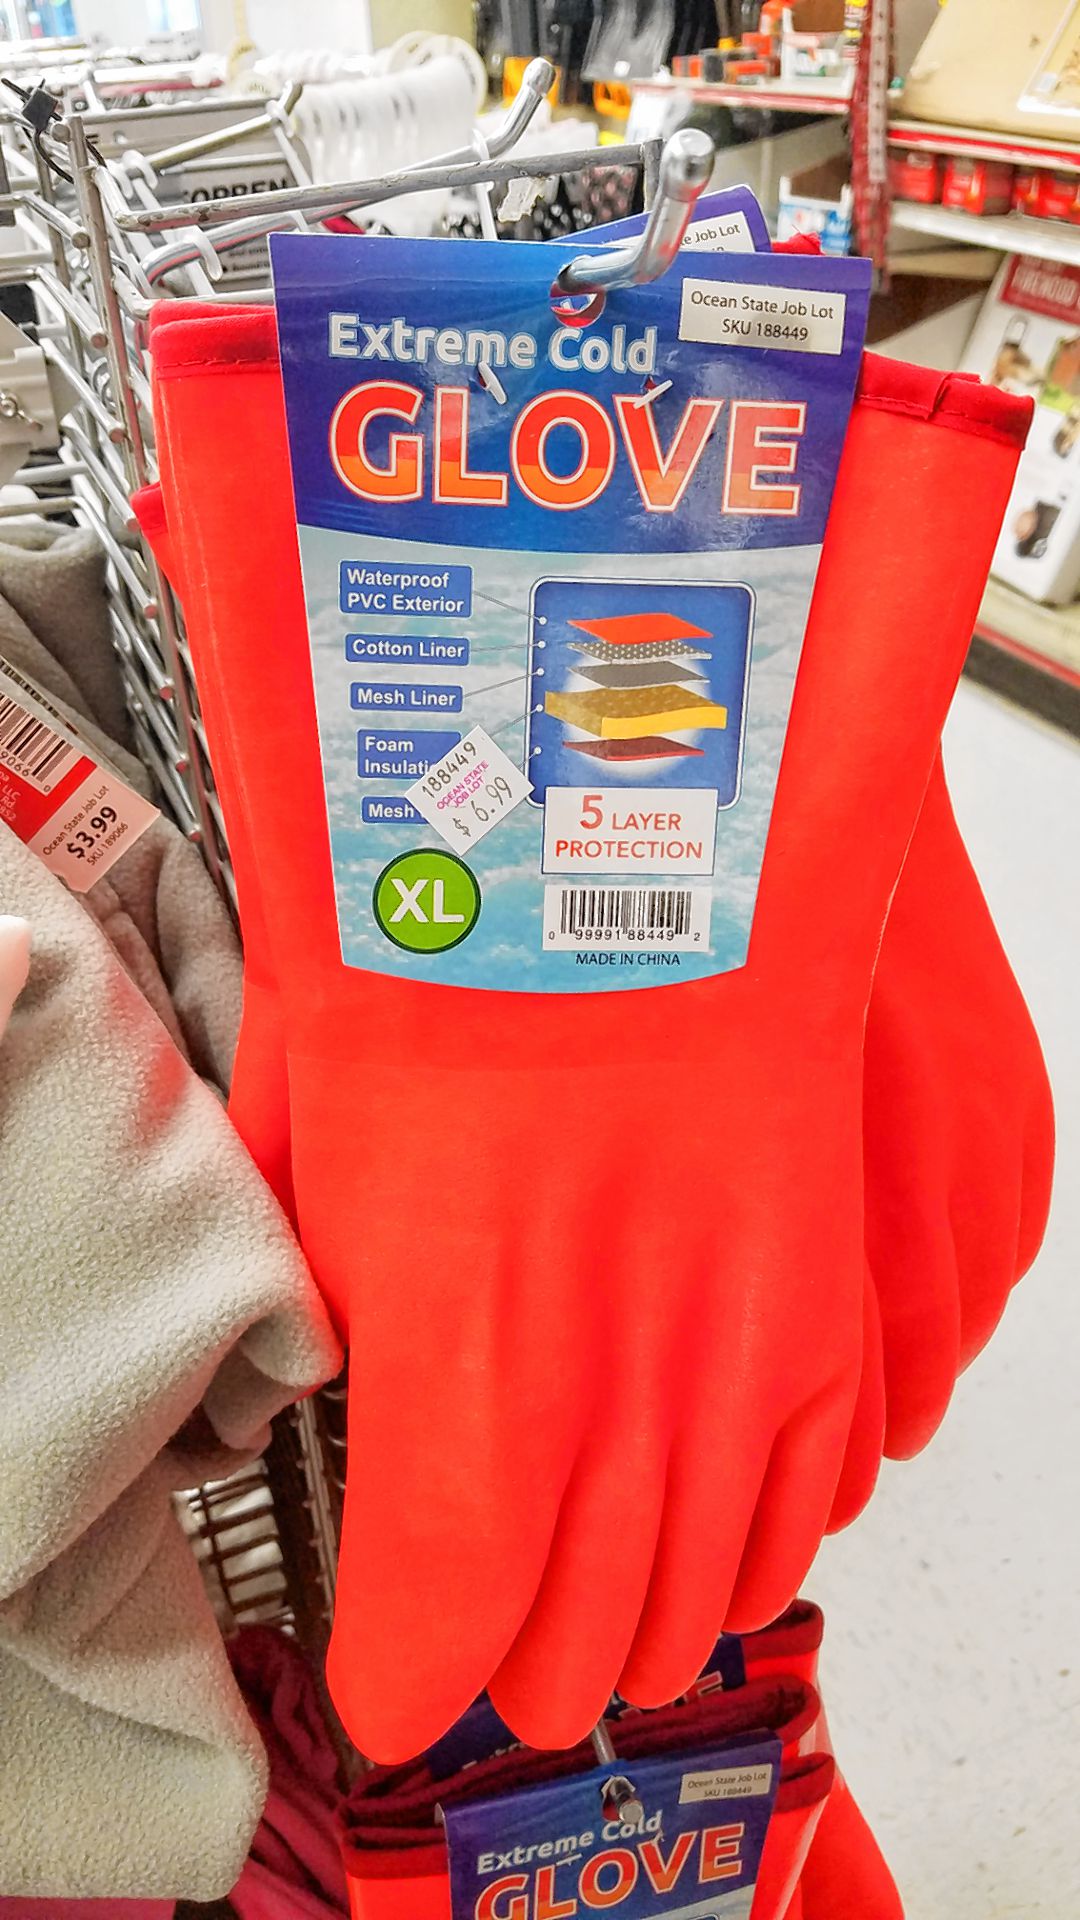 For those of you who get super-cold hands, you need these Extreme Cold Glove(s). Covered with a color that can be seen from space, you'll never have an excuse for losing your gloves again. JON BODELL / Insider staff